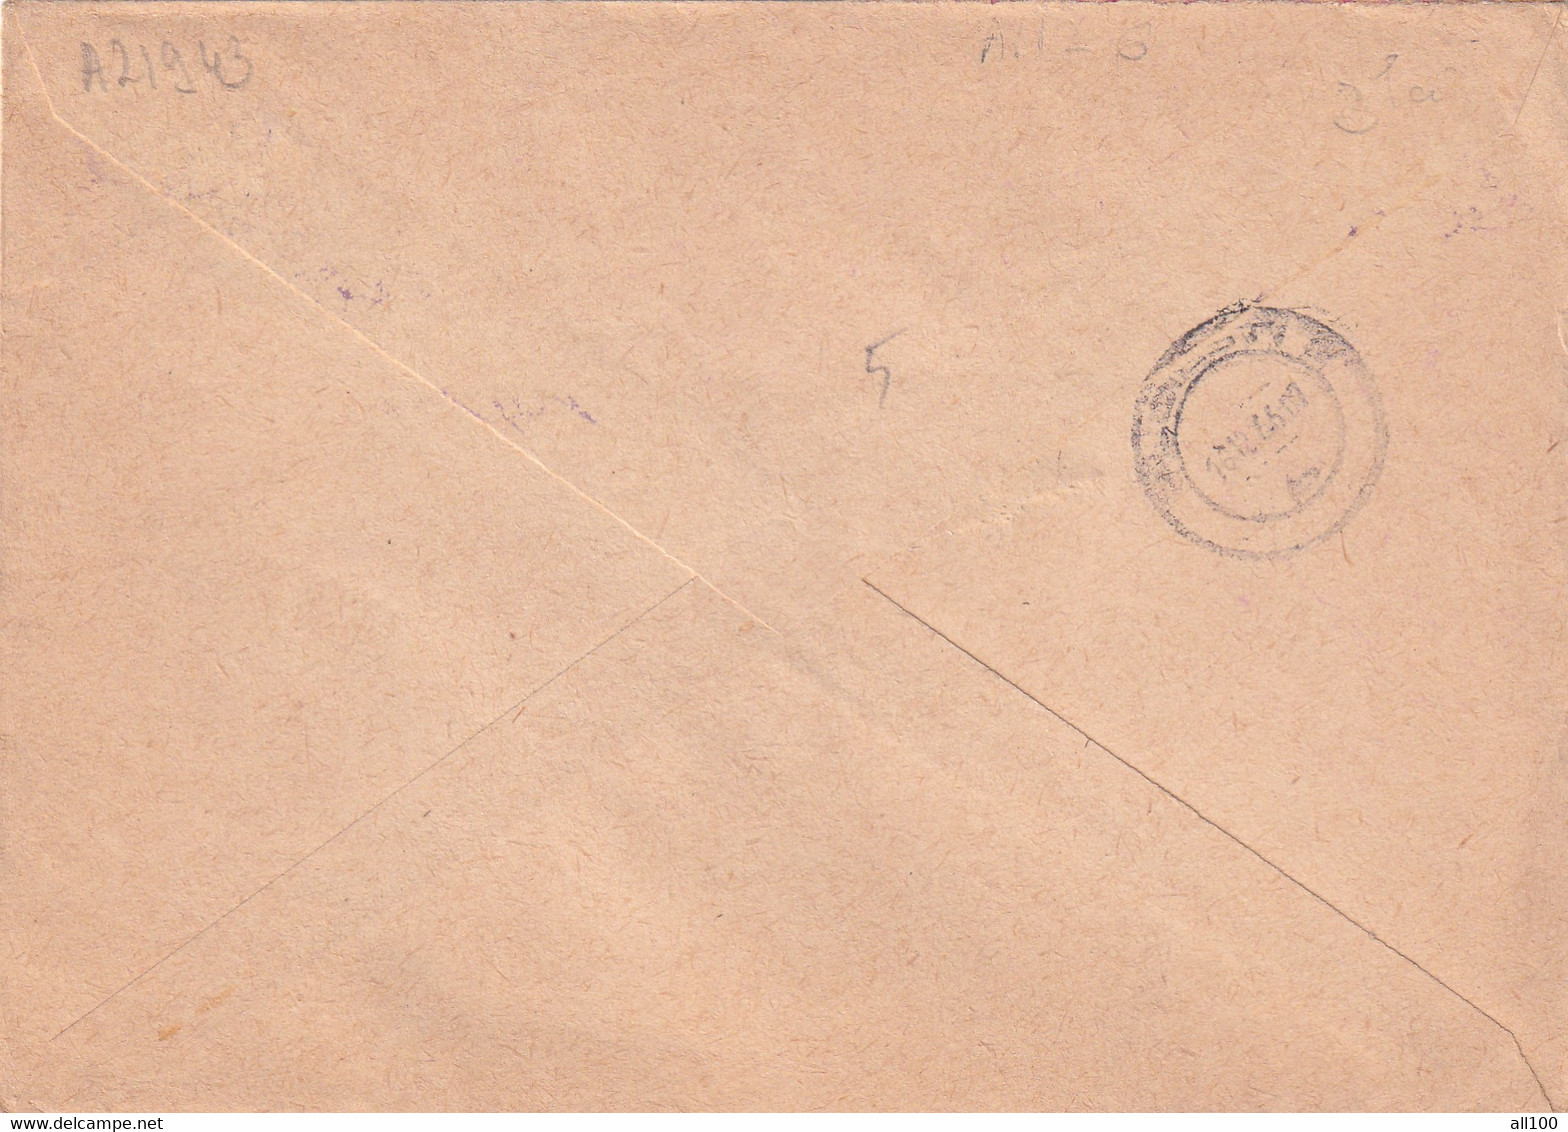 A21943 - Stamp Eduard Vilde Estonian Writer 1965 USSR Mail Soviet Union Cover Envelope Used 1966 Sent To Romania - Lettres & Documents